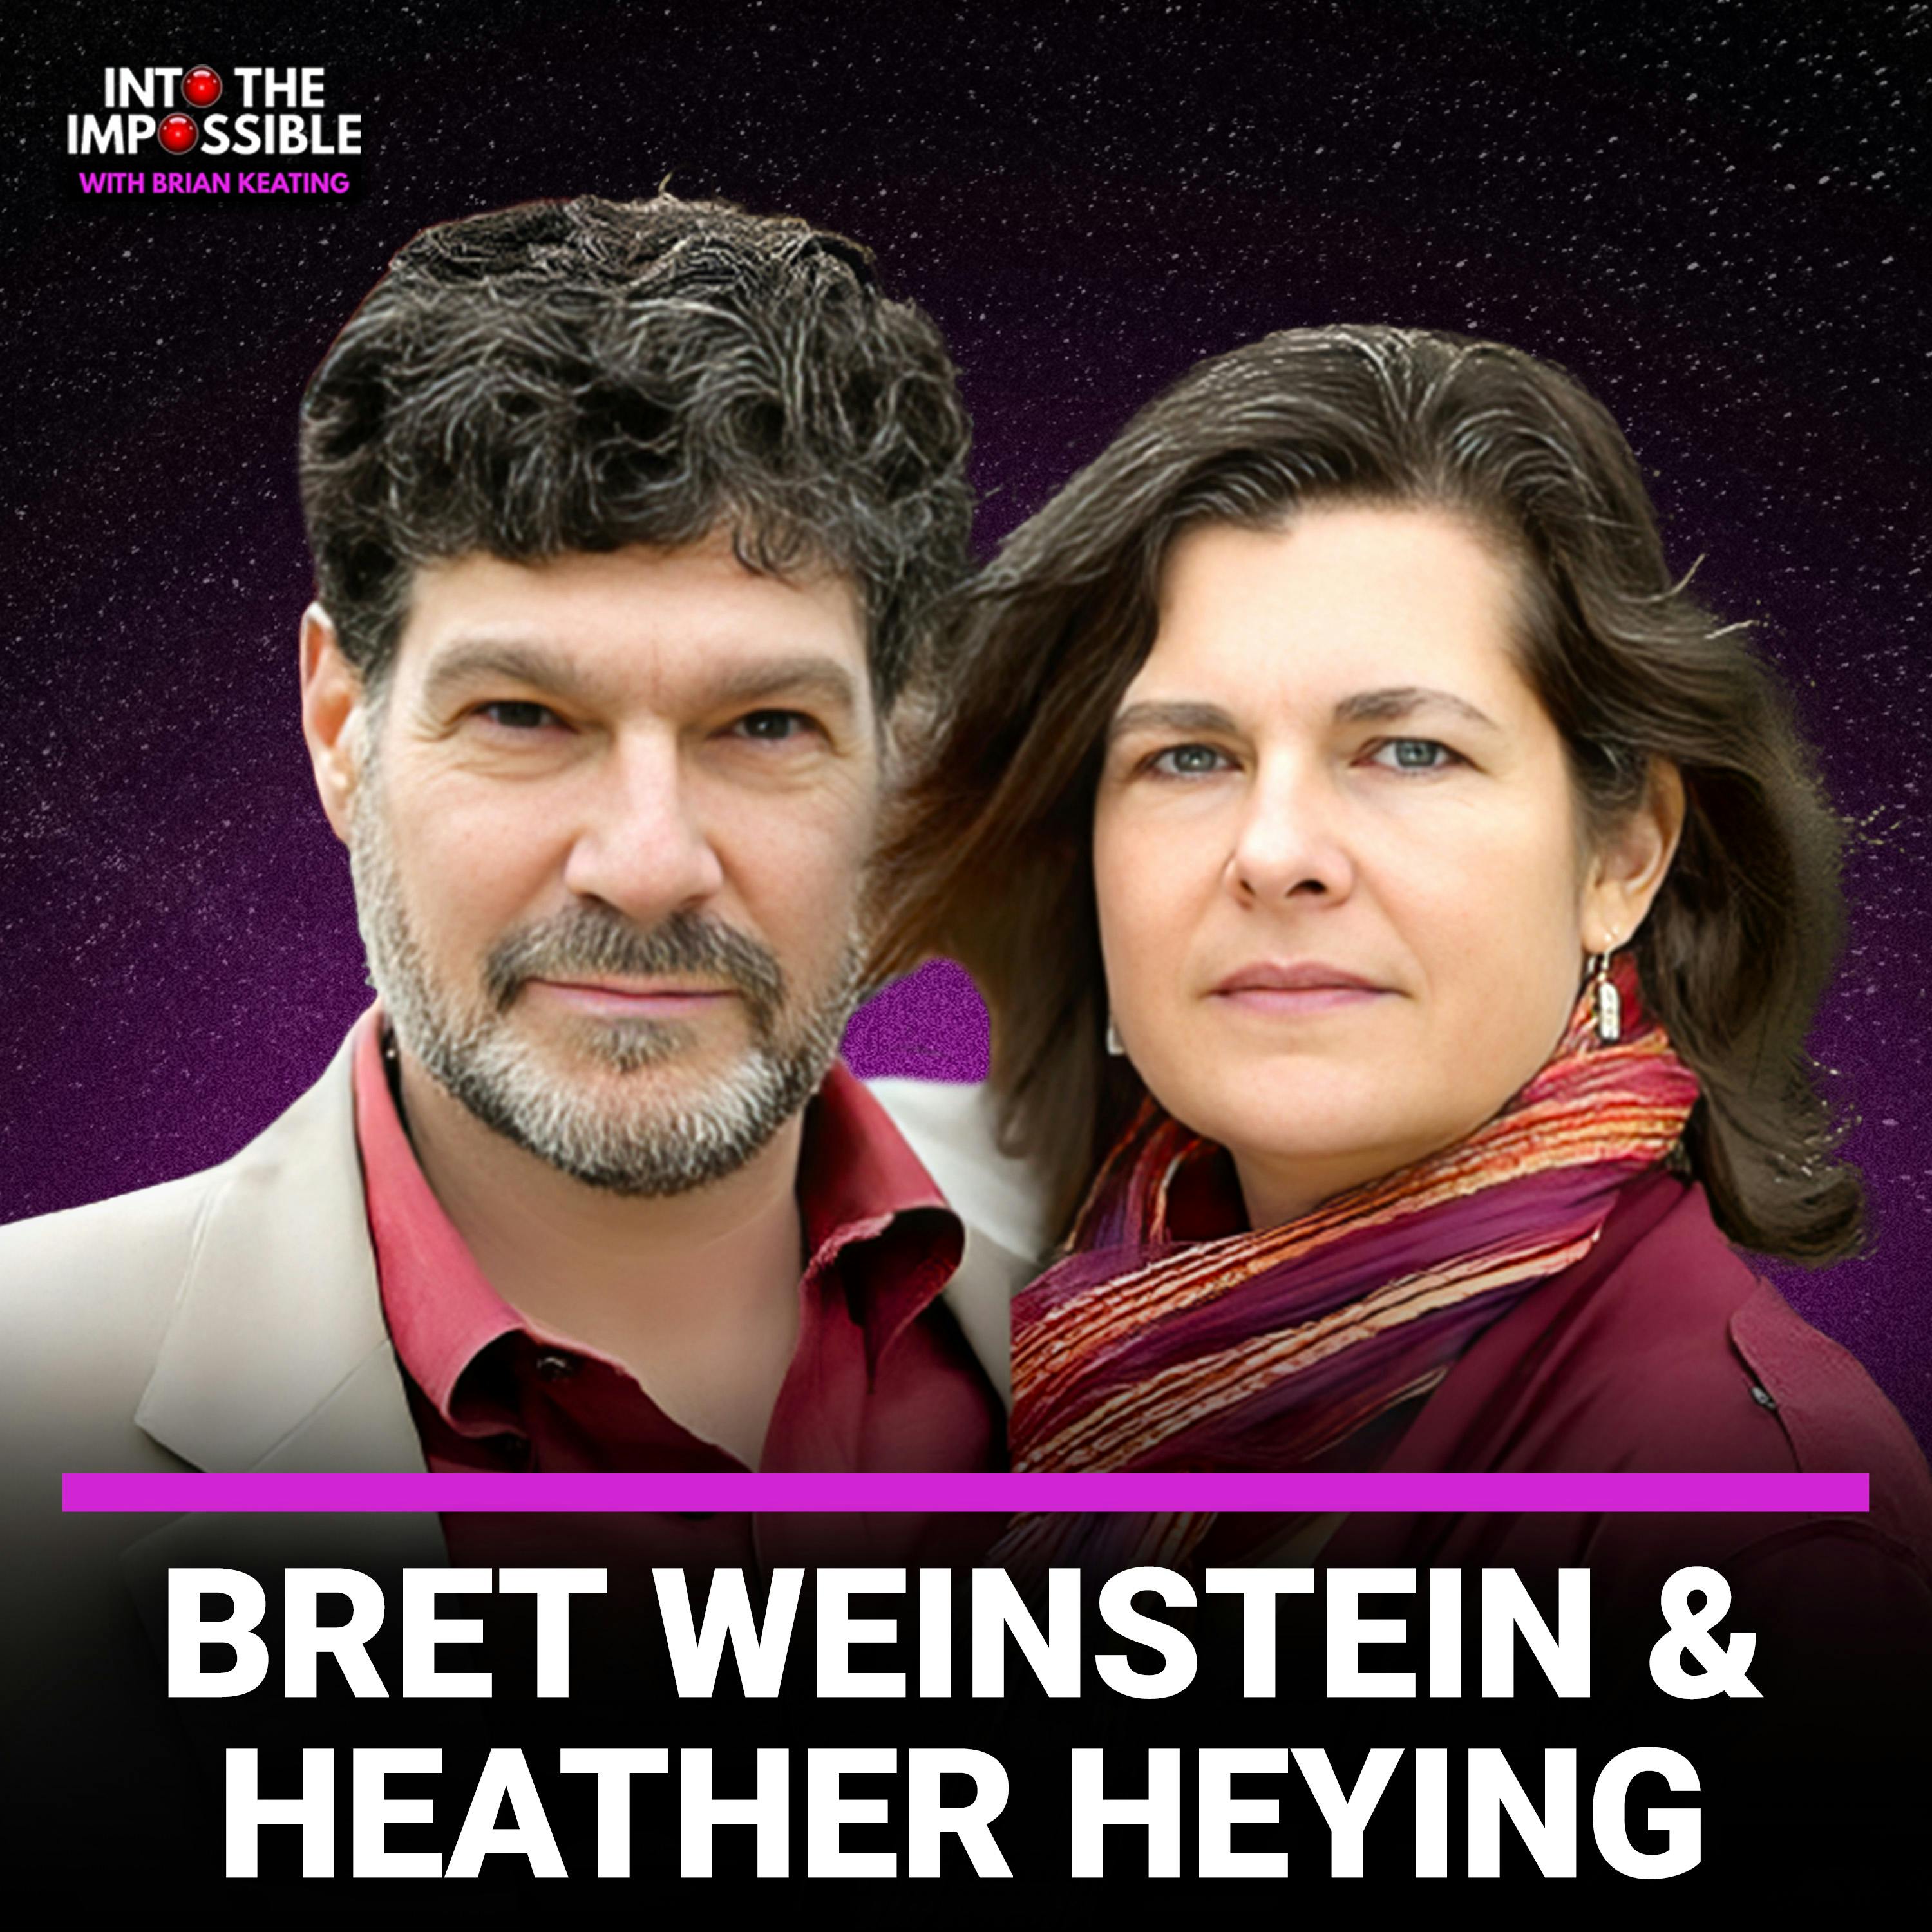 Bret Weinstein & Heather Heying: The Modern World Is Out Of Sync With Humans! (#363)